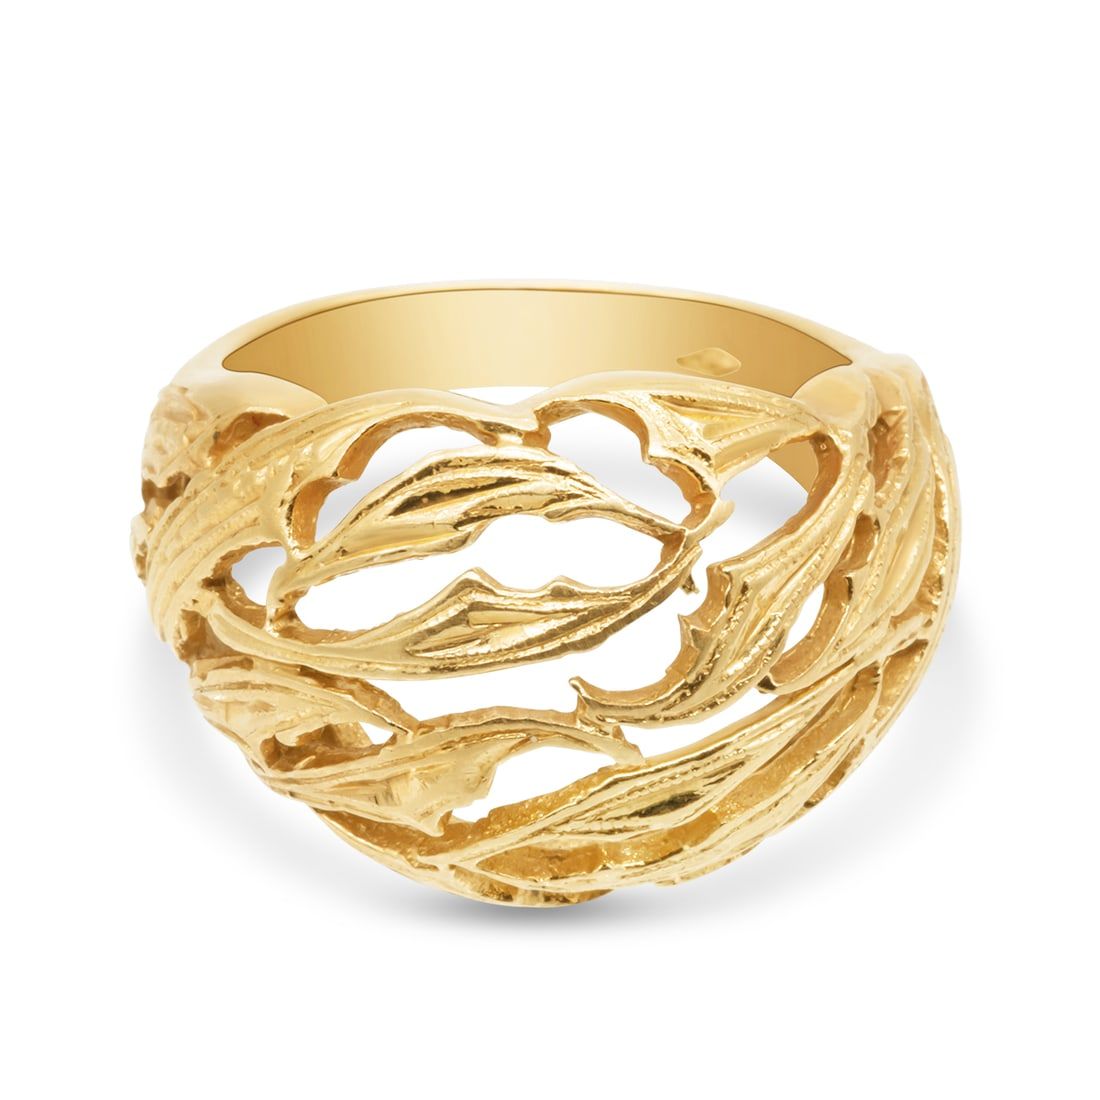 18K YELLOW GOLD DOMED LEAF RING18k